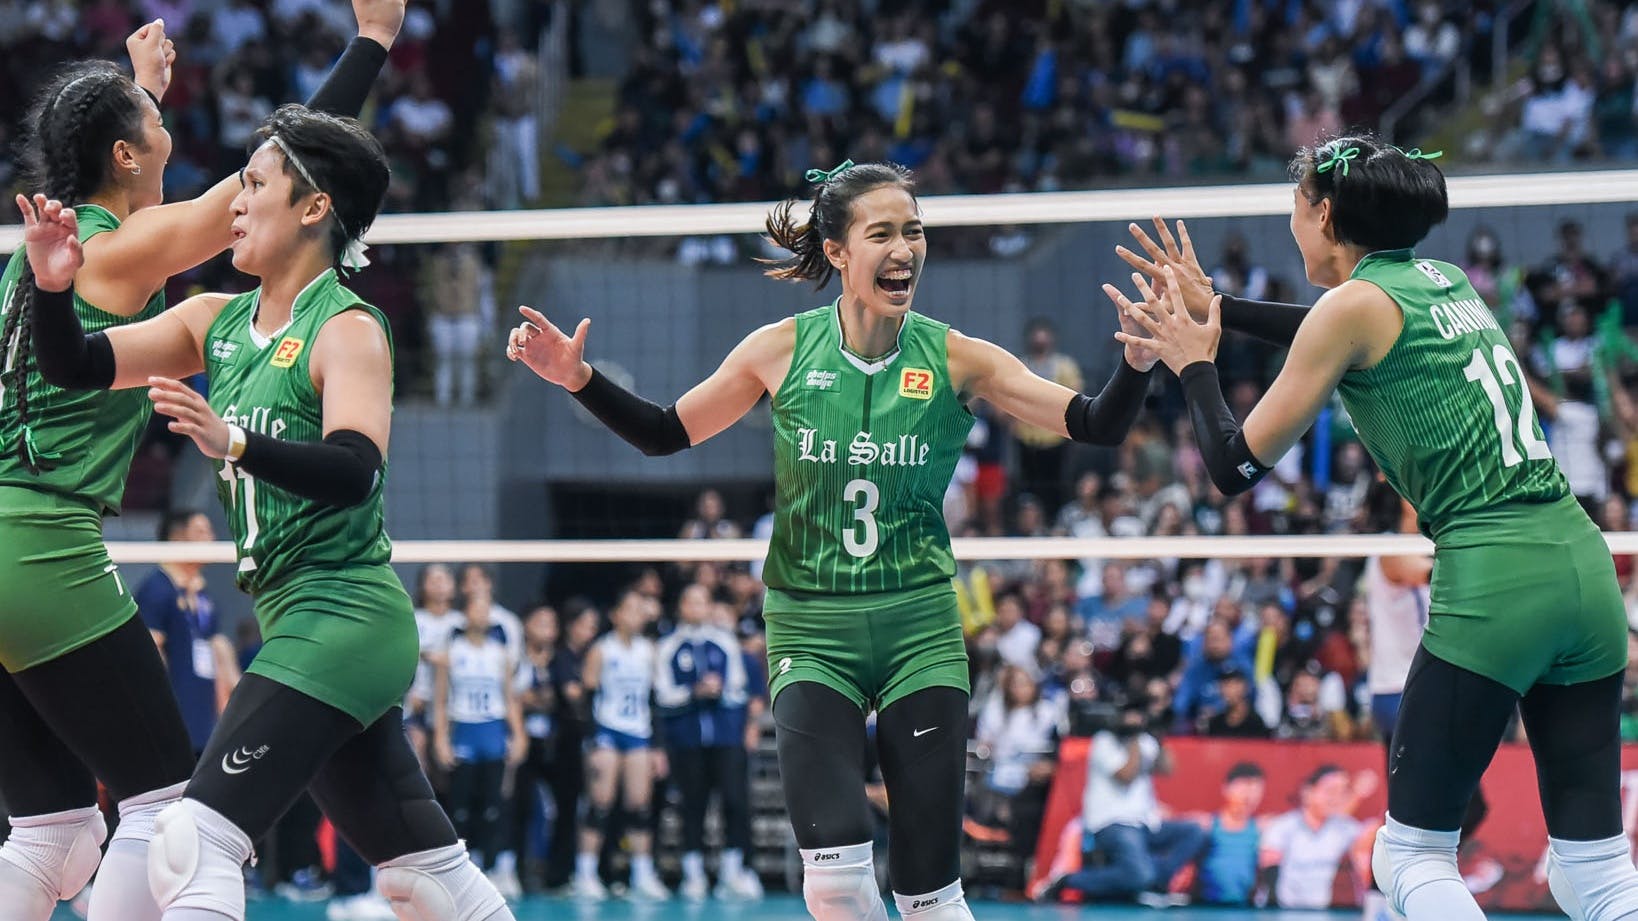 Thea Gagate steps up when it mattered most for La Salle in UAAP women